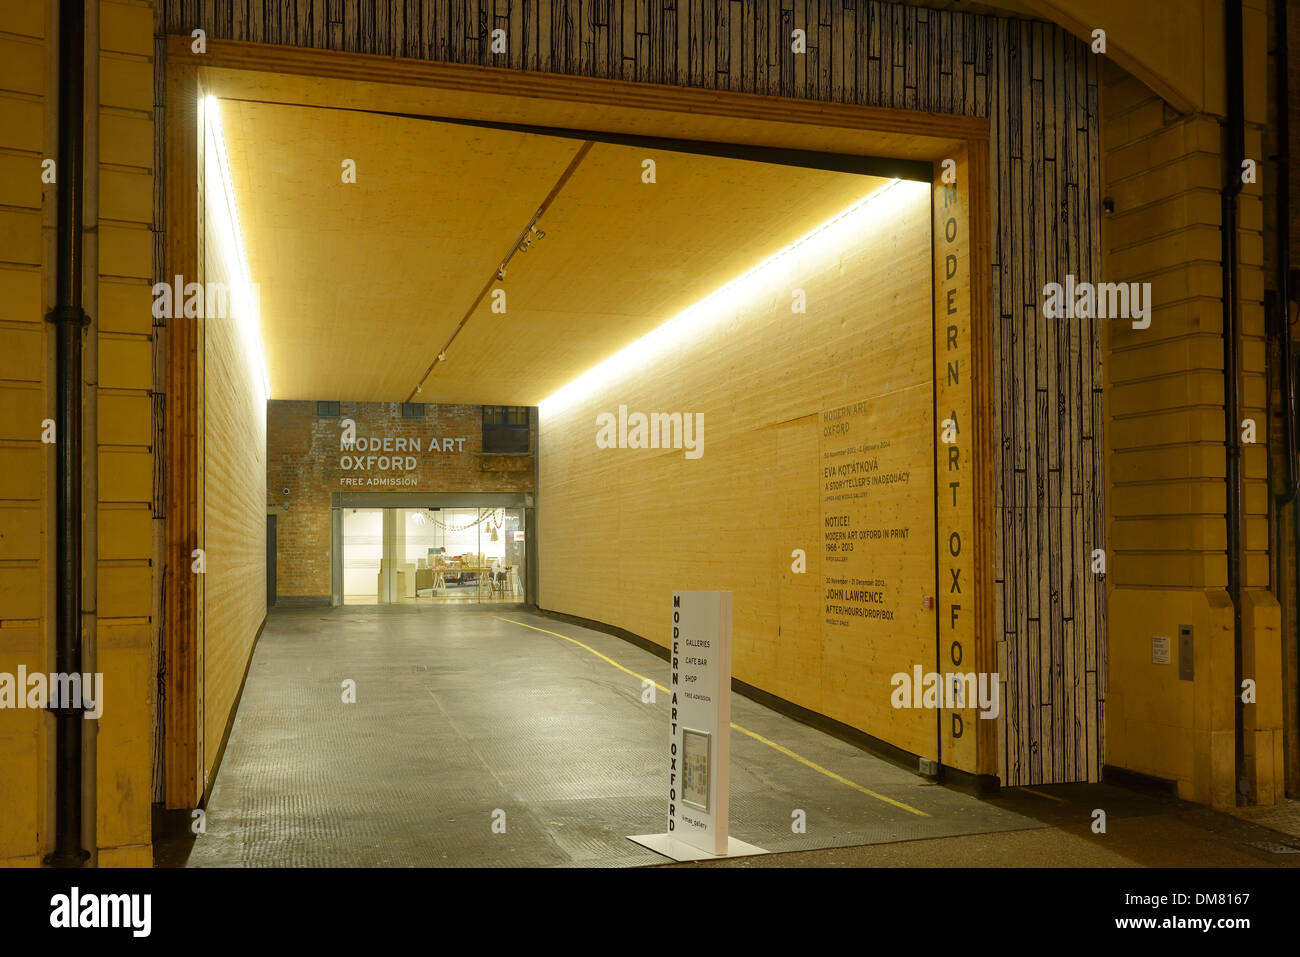 The entrance to the gallery of Modern Art in Oxford city centre UK Stock Photo